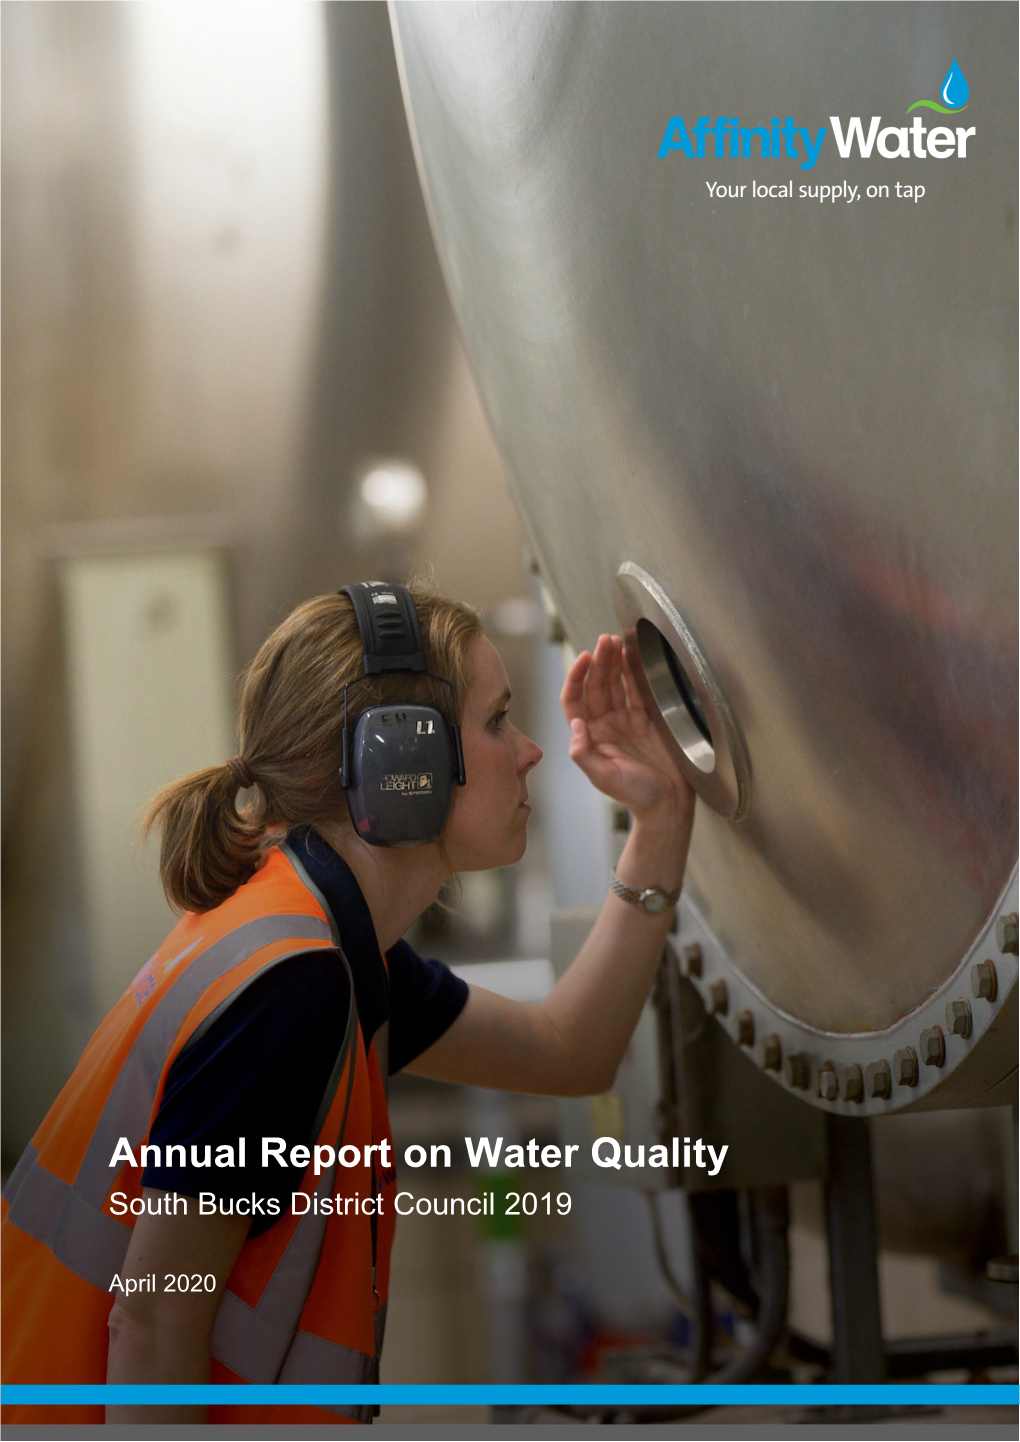 Annual Report on Water Quality South Bucks District Council 2019